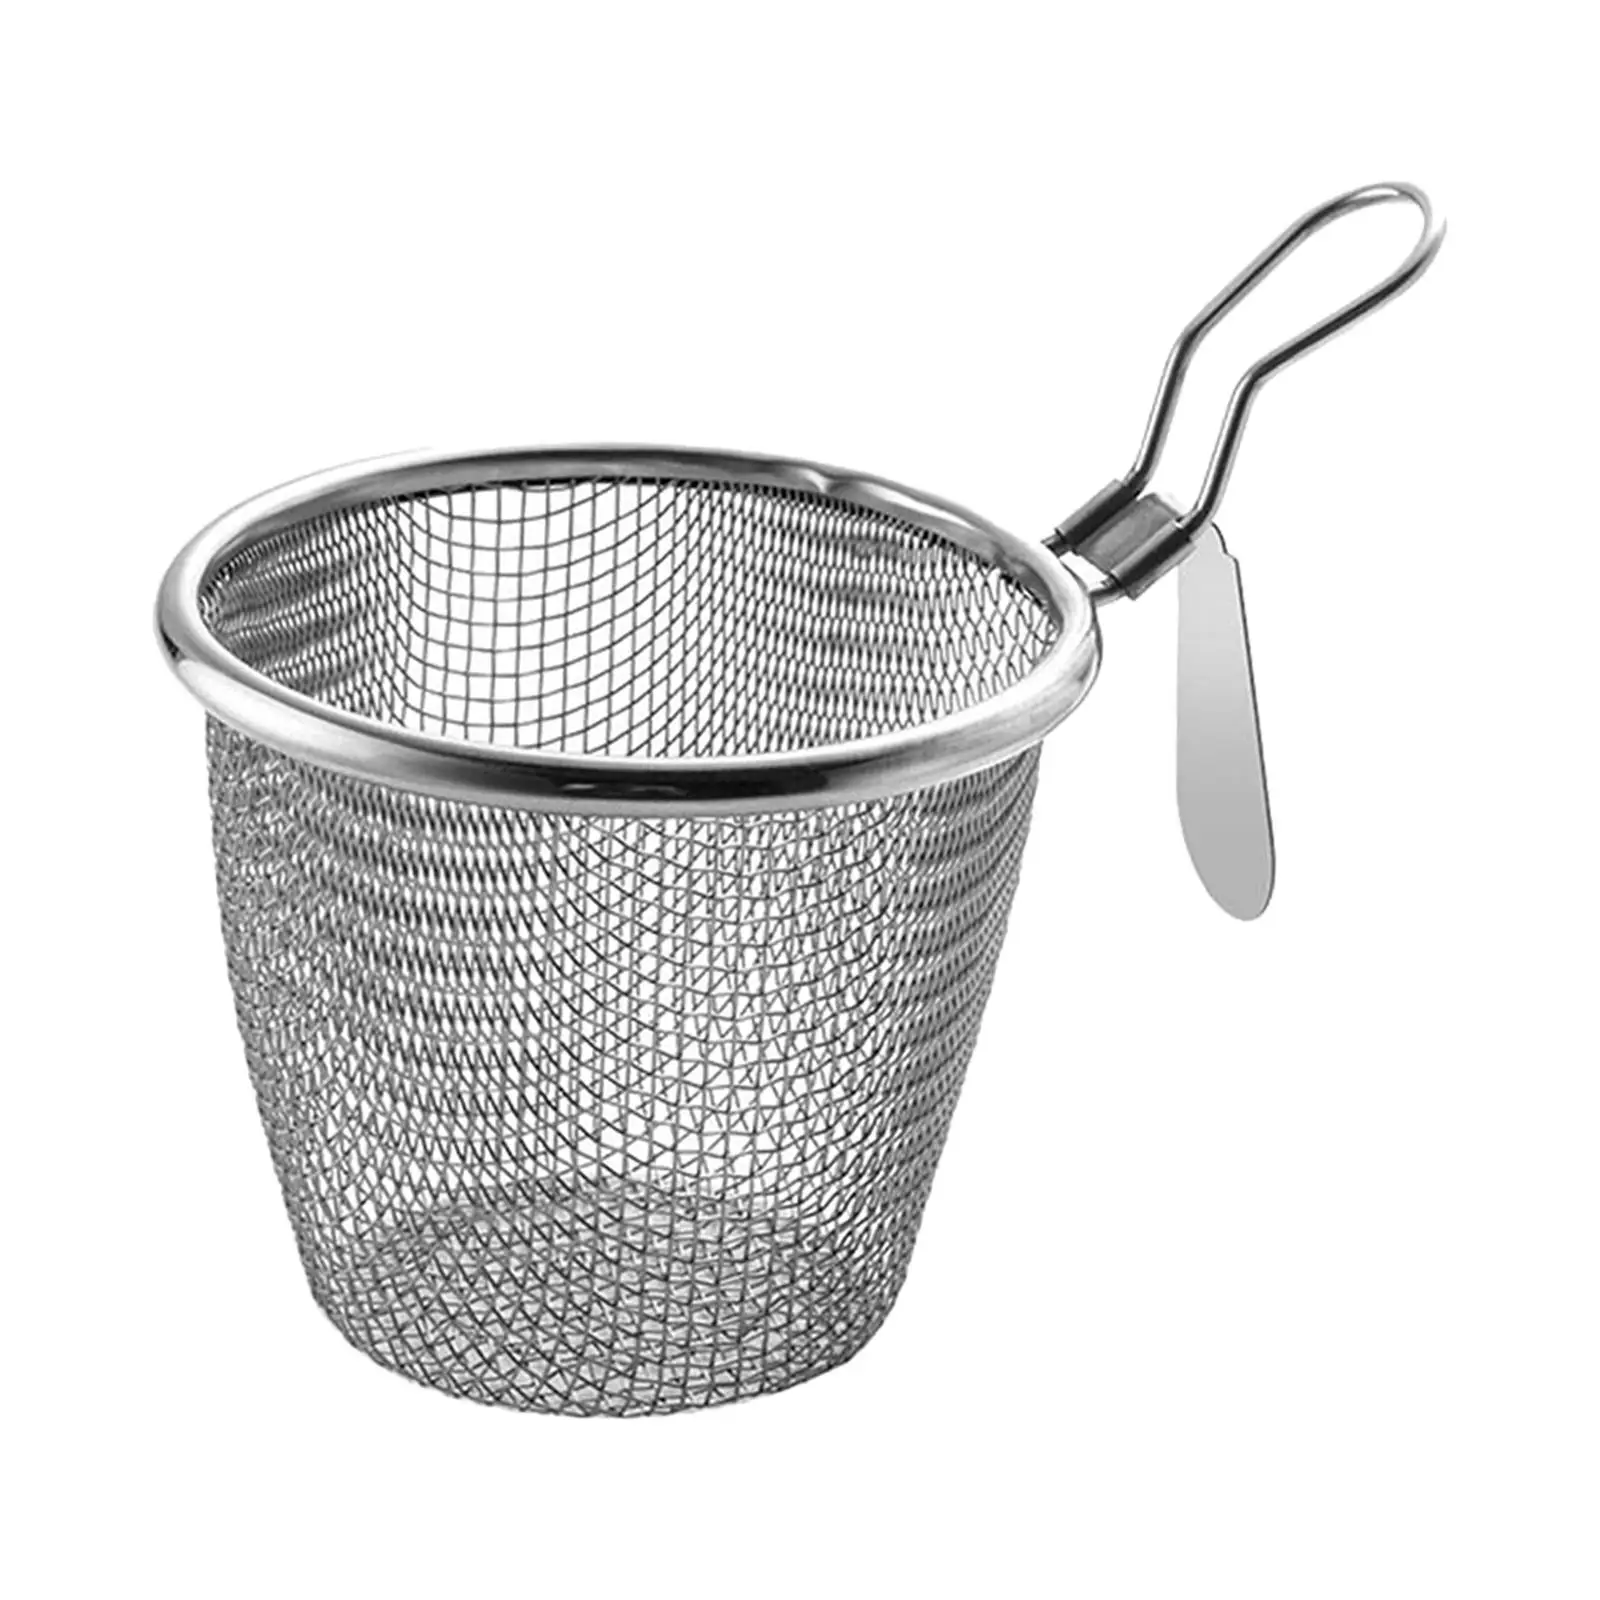 Stainless Steel Mesh Strainer with Handle Pasta Boil Basket Food Colander for Camping Noodles Home Accessory Frying Pasta